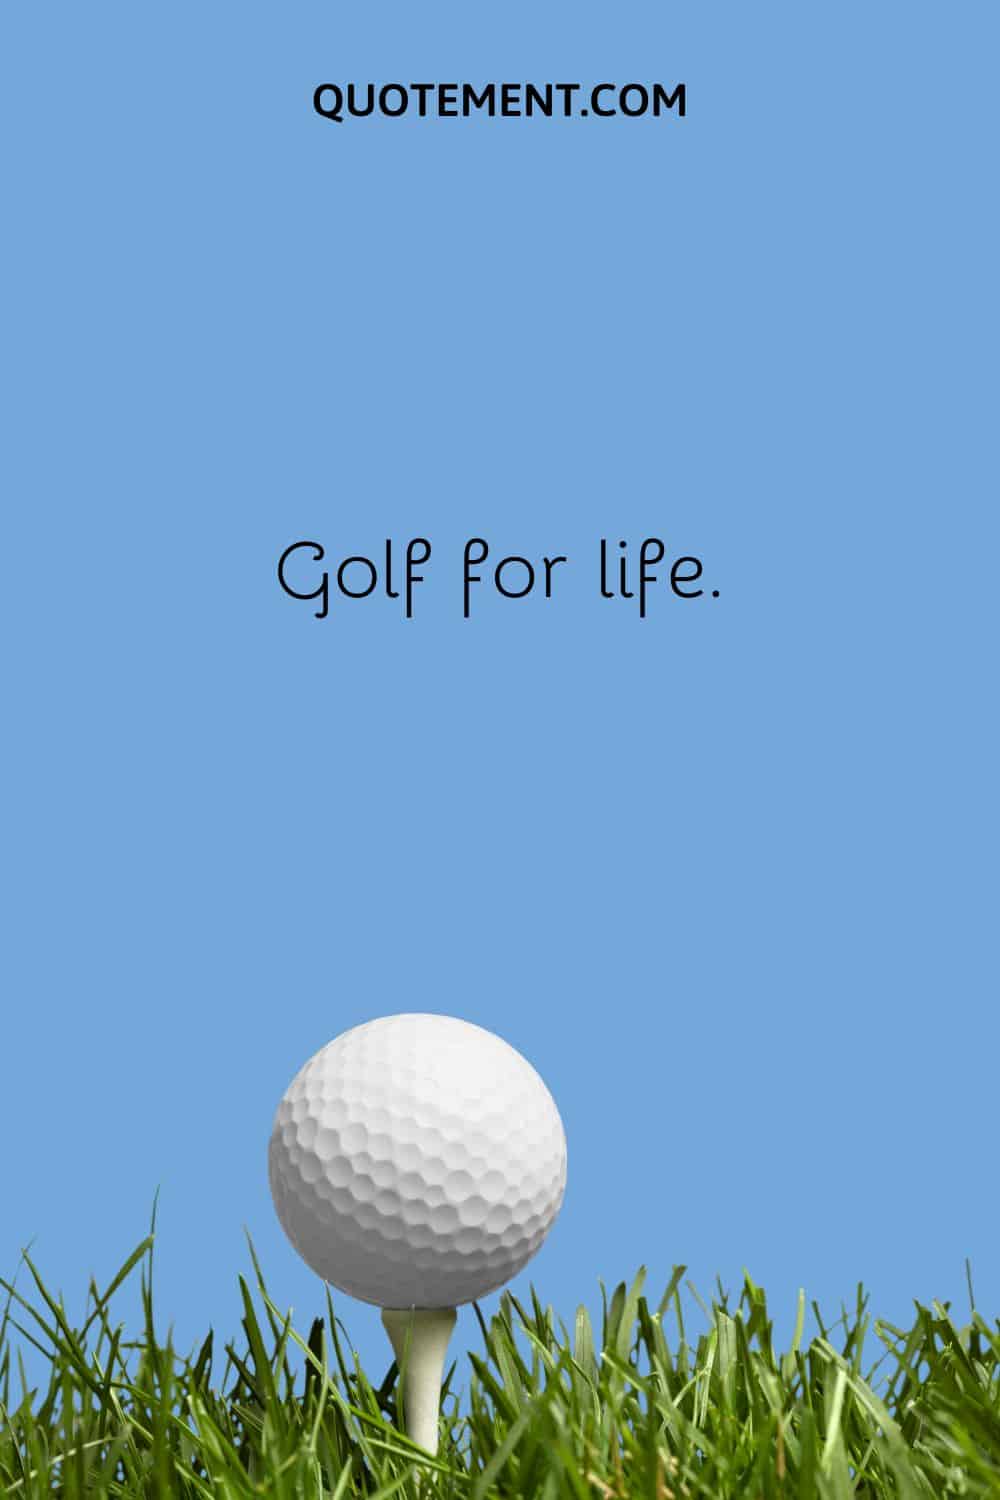 Golf for life.